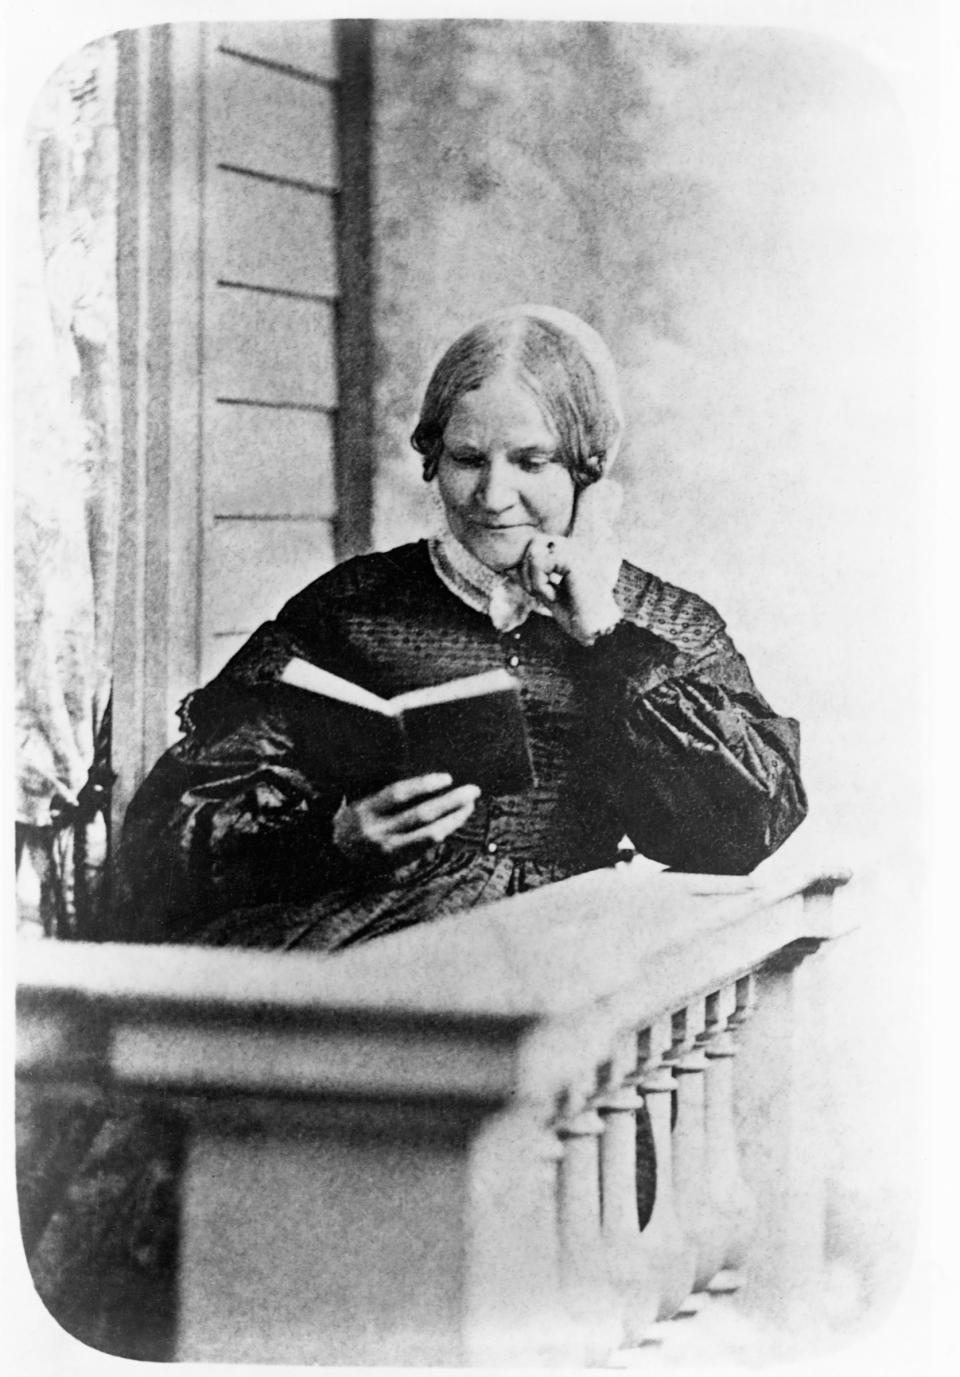 Lydia Maria Child (1802-1880) reads a book on a front porch. Child wrote and edited books promoting the suffragist and abolitionist causes. | Corbis/Getty Images